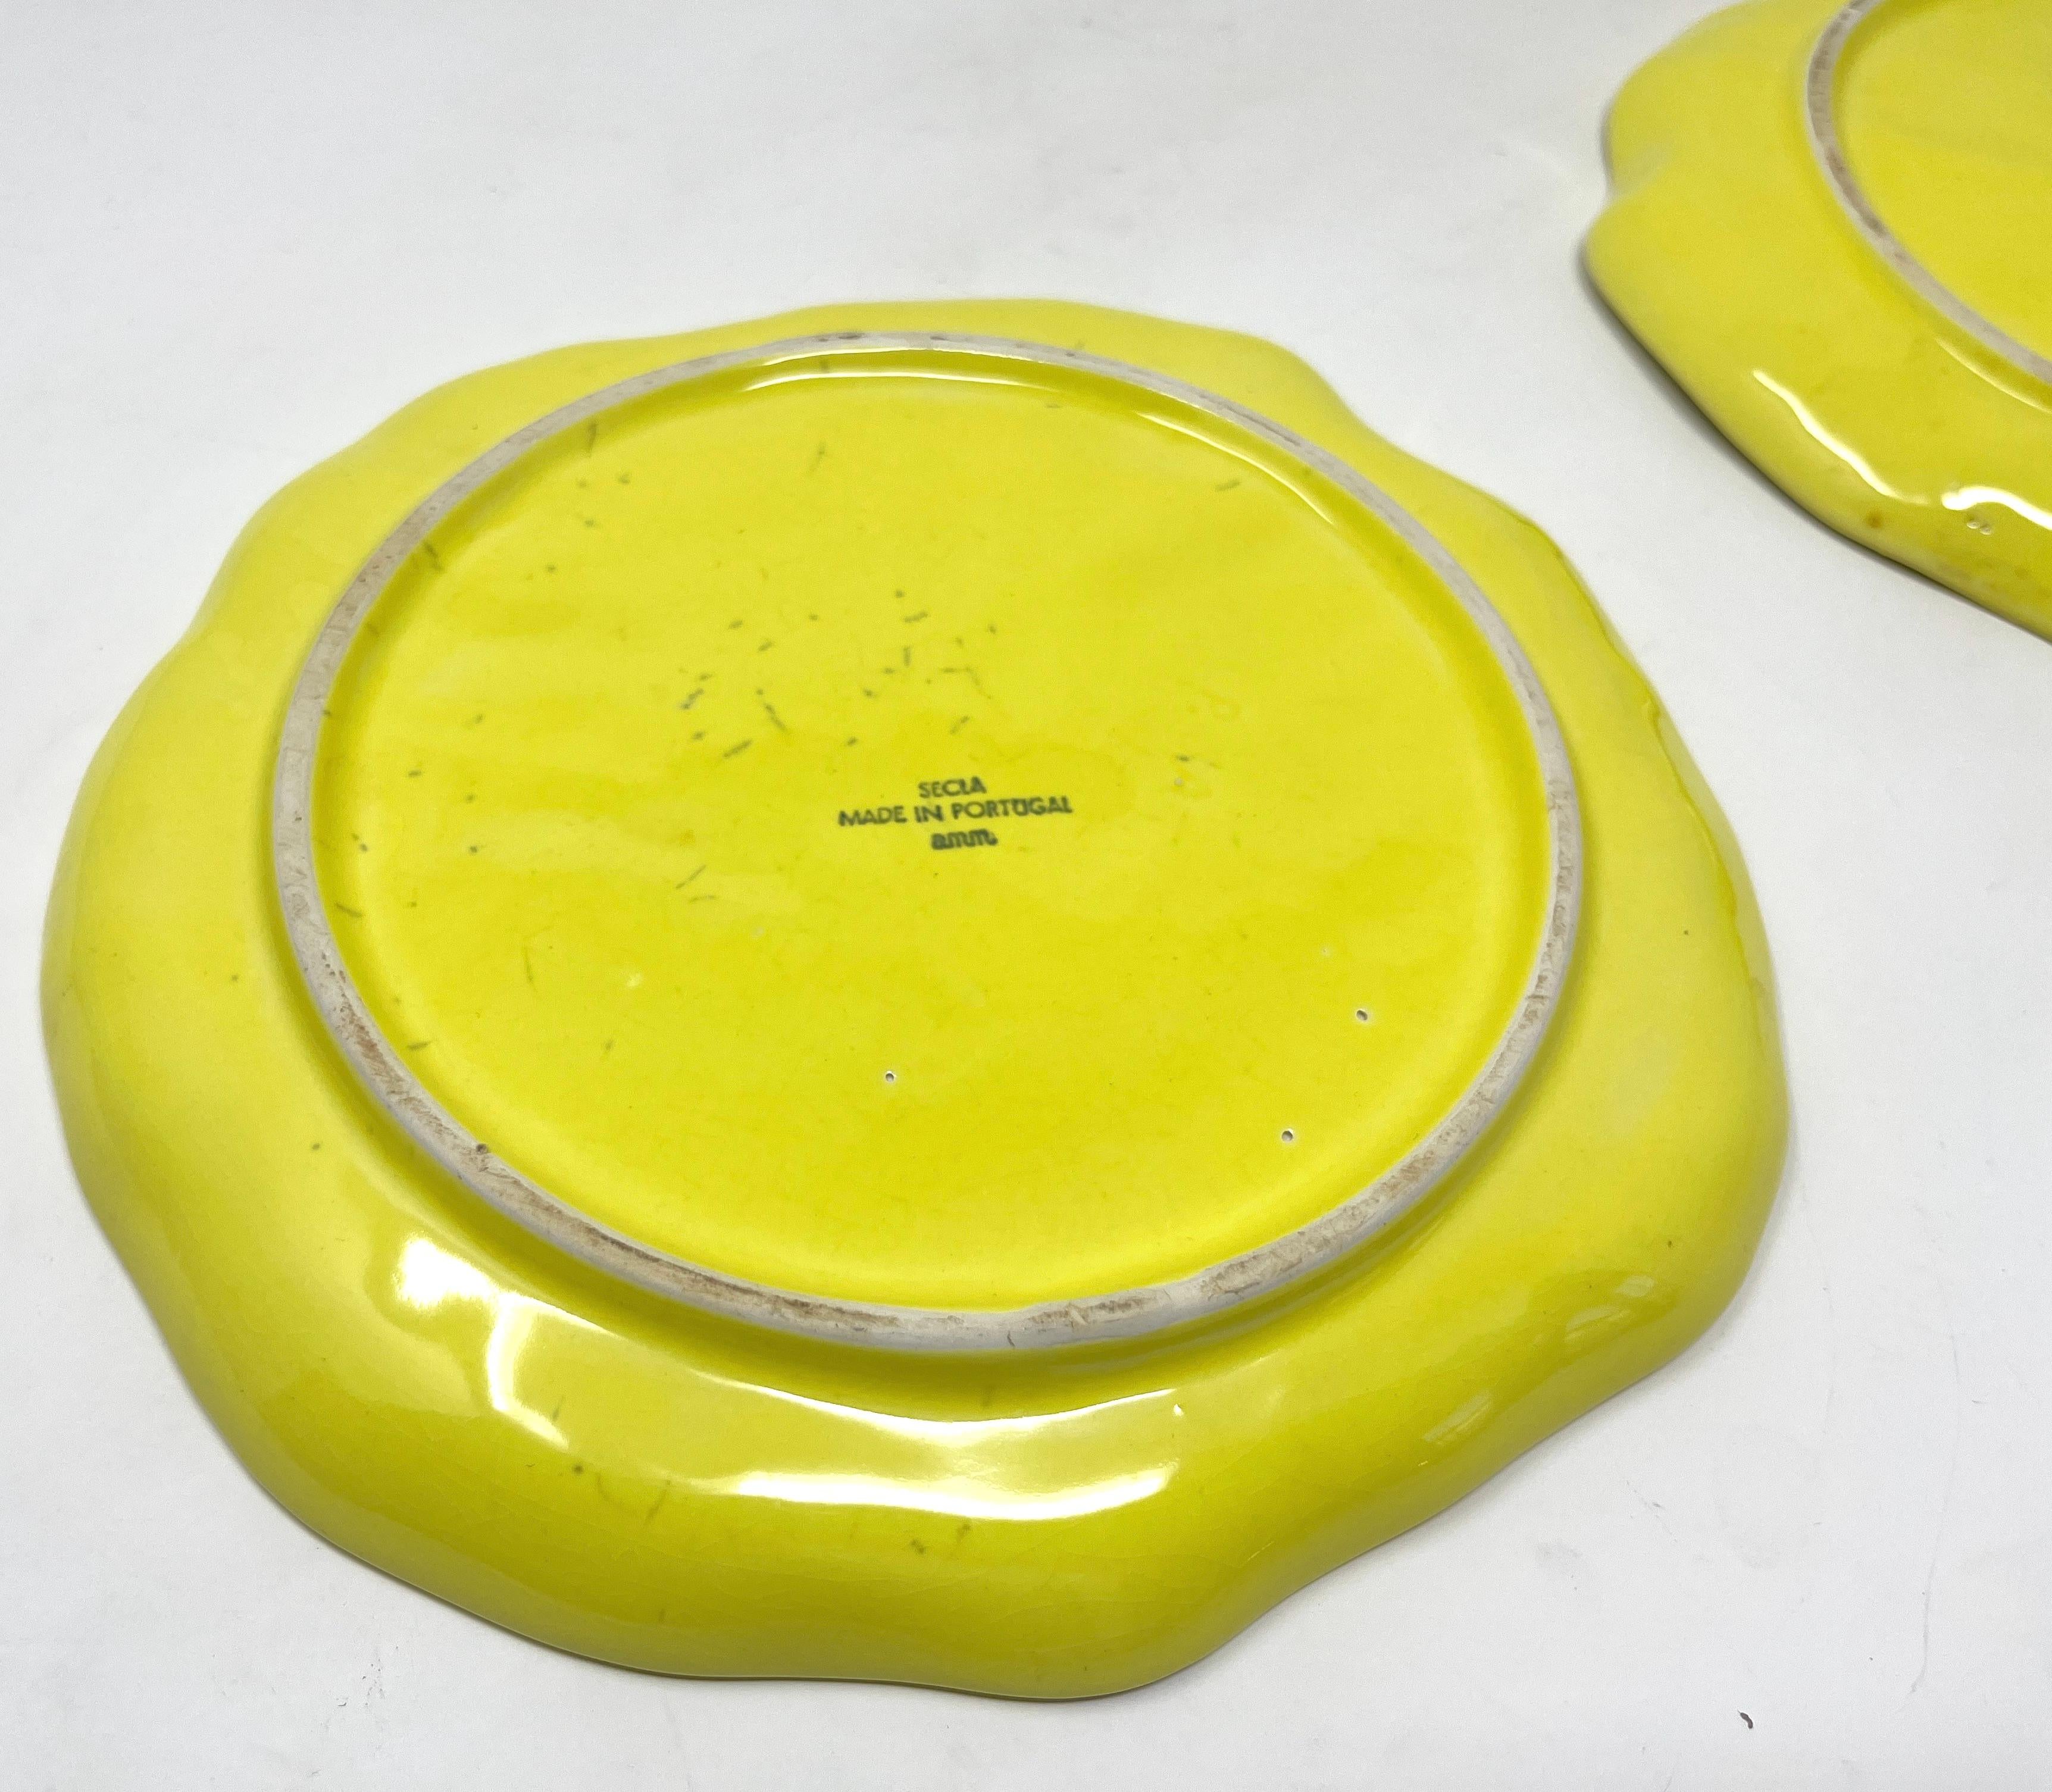 Vintage Portuguese Secla Majolica Lettuce Leaf Lunch Plates, Pair, Lemon Yellow In Fair Condition For Sale In Chicago, IL